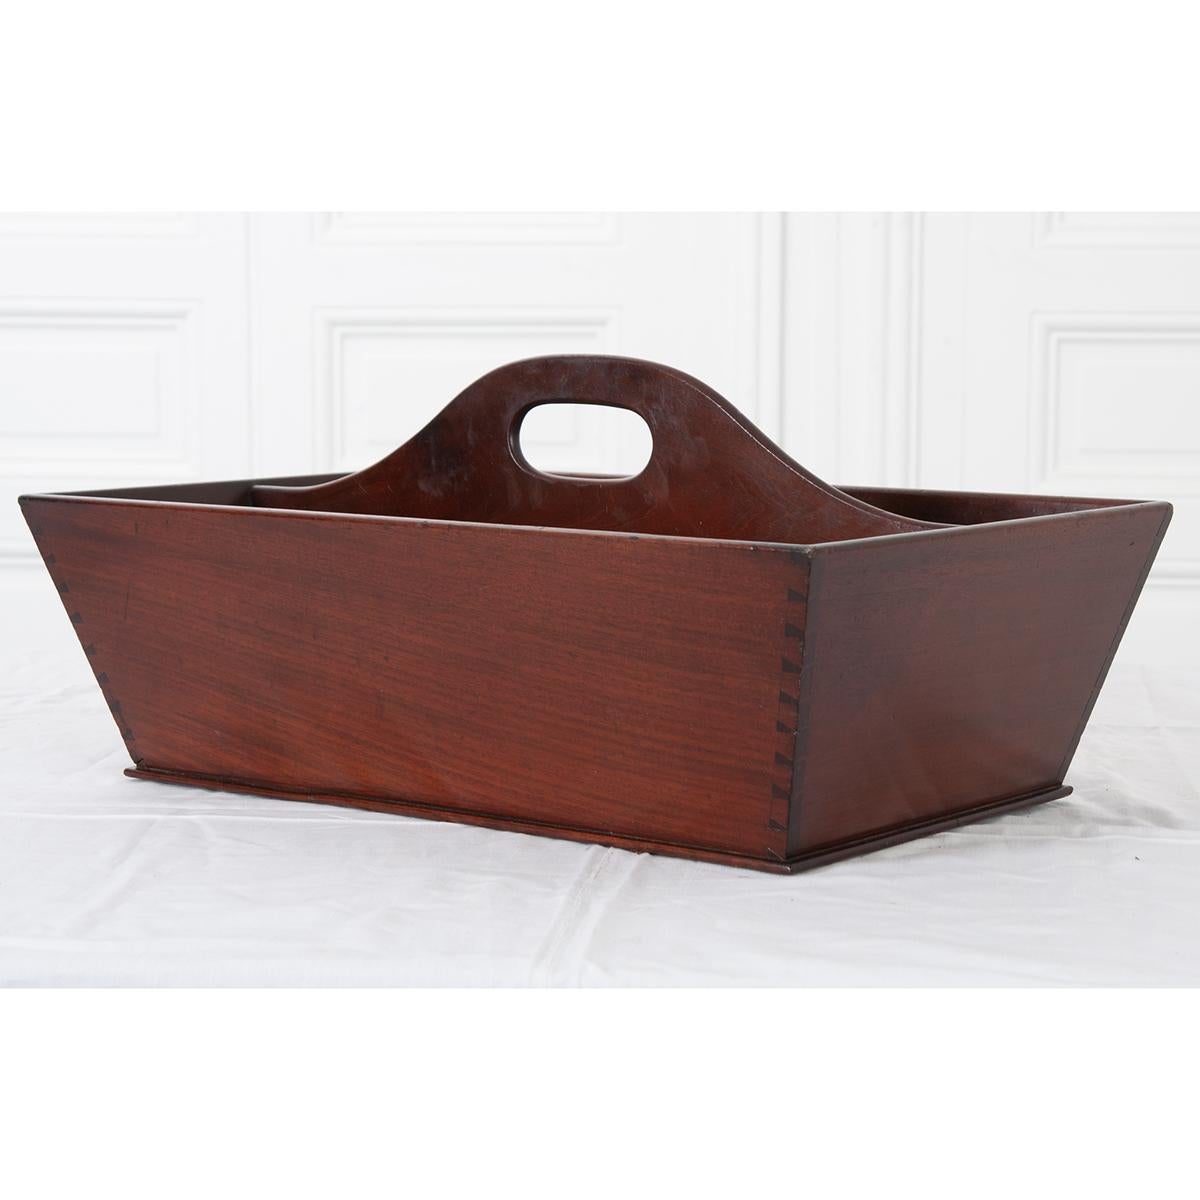 Other English Early 19th Century Mahogany Tray For Sale